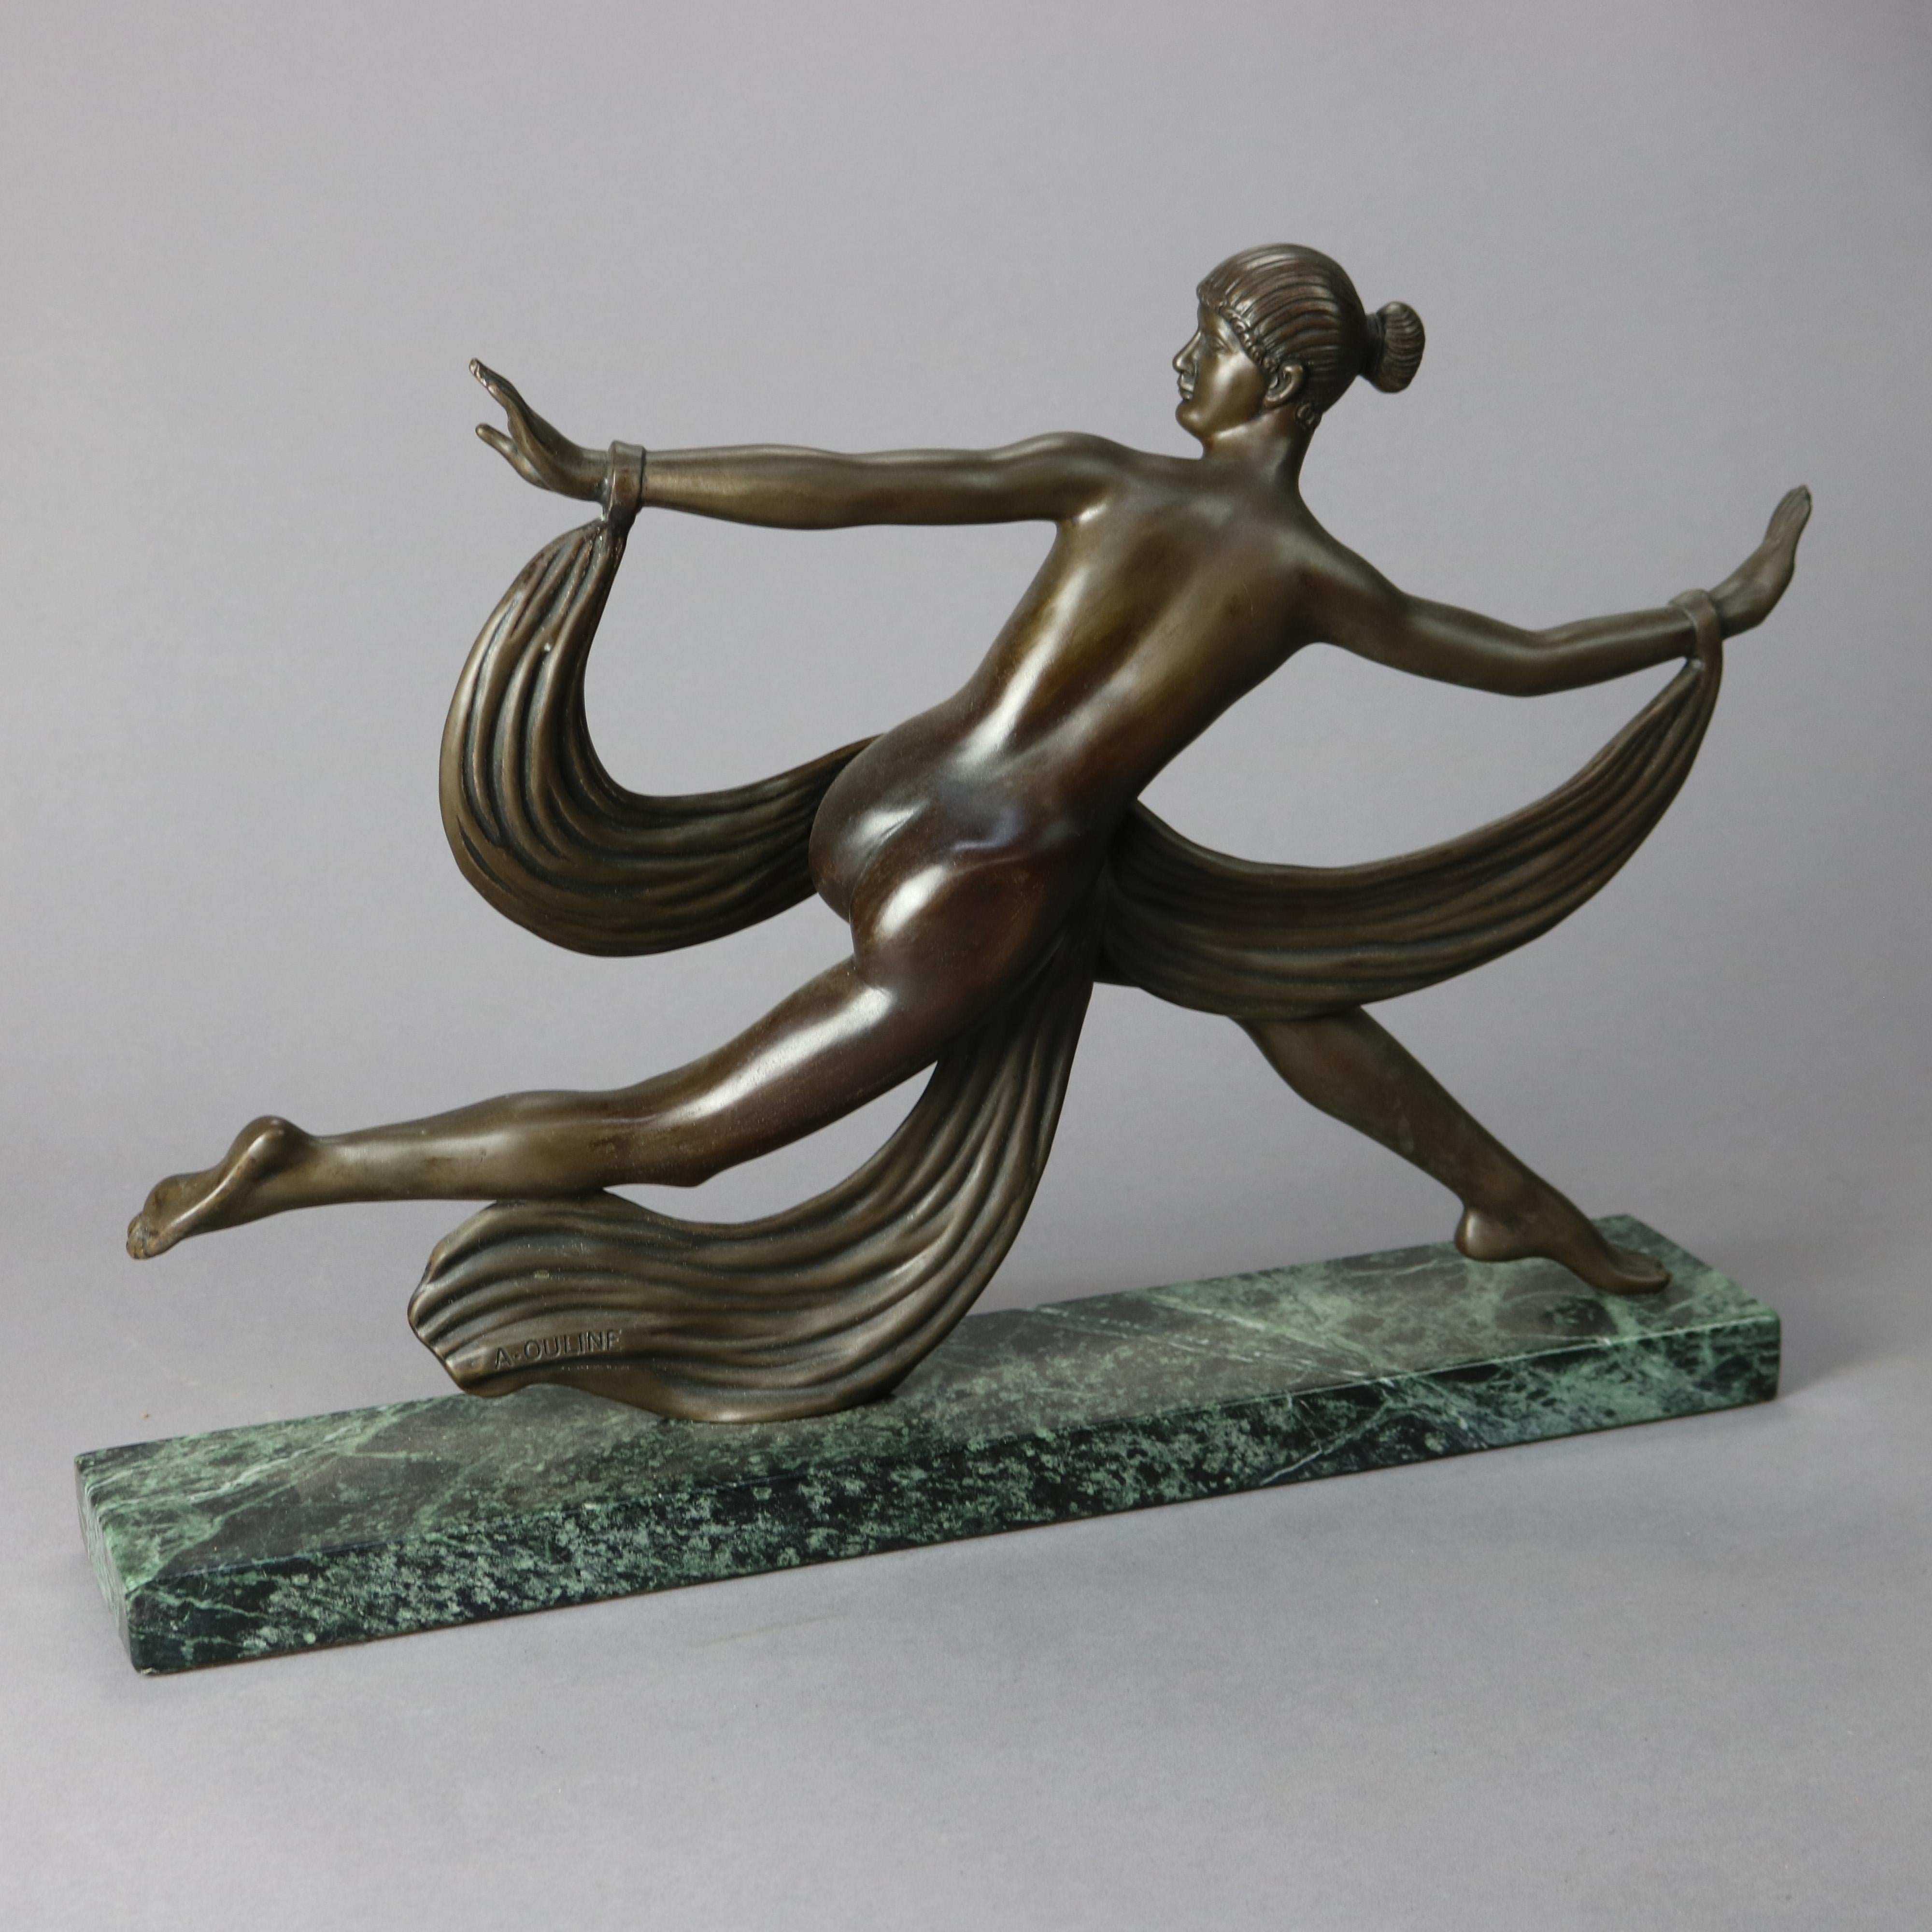 Antique French Art Deco Sculpture Statue of a Woman On Marble Plinth, 20th C. For Sale 9